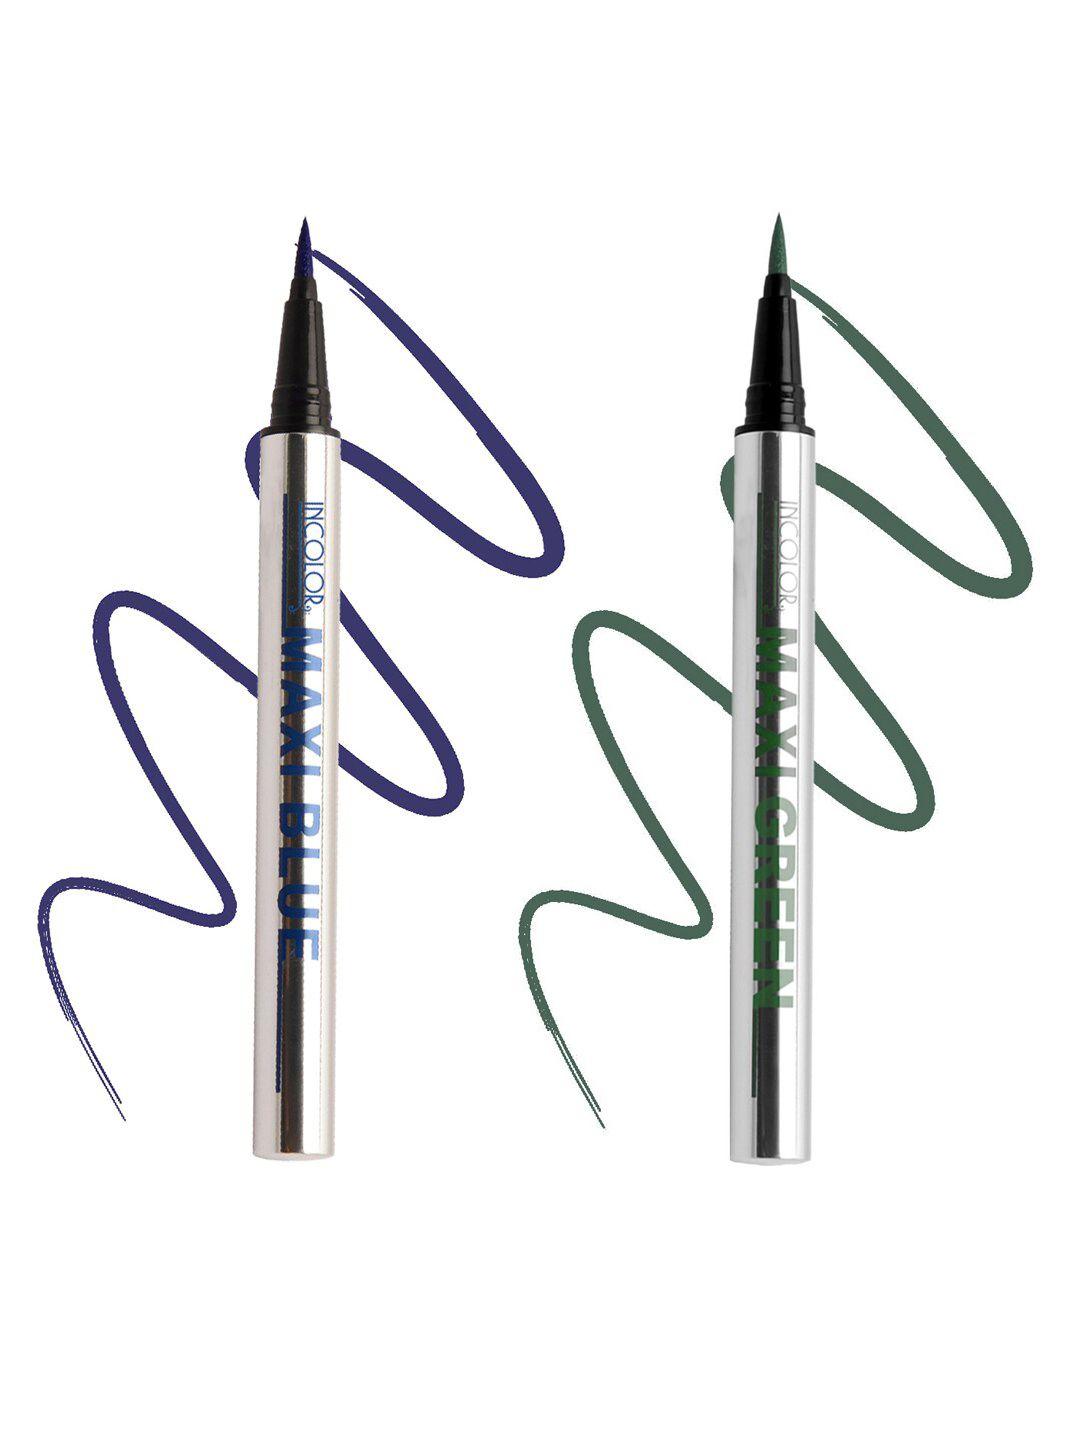 incolor set of 2 eyeliners